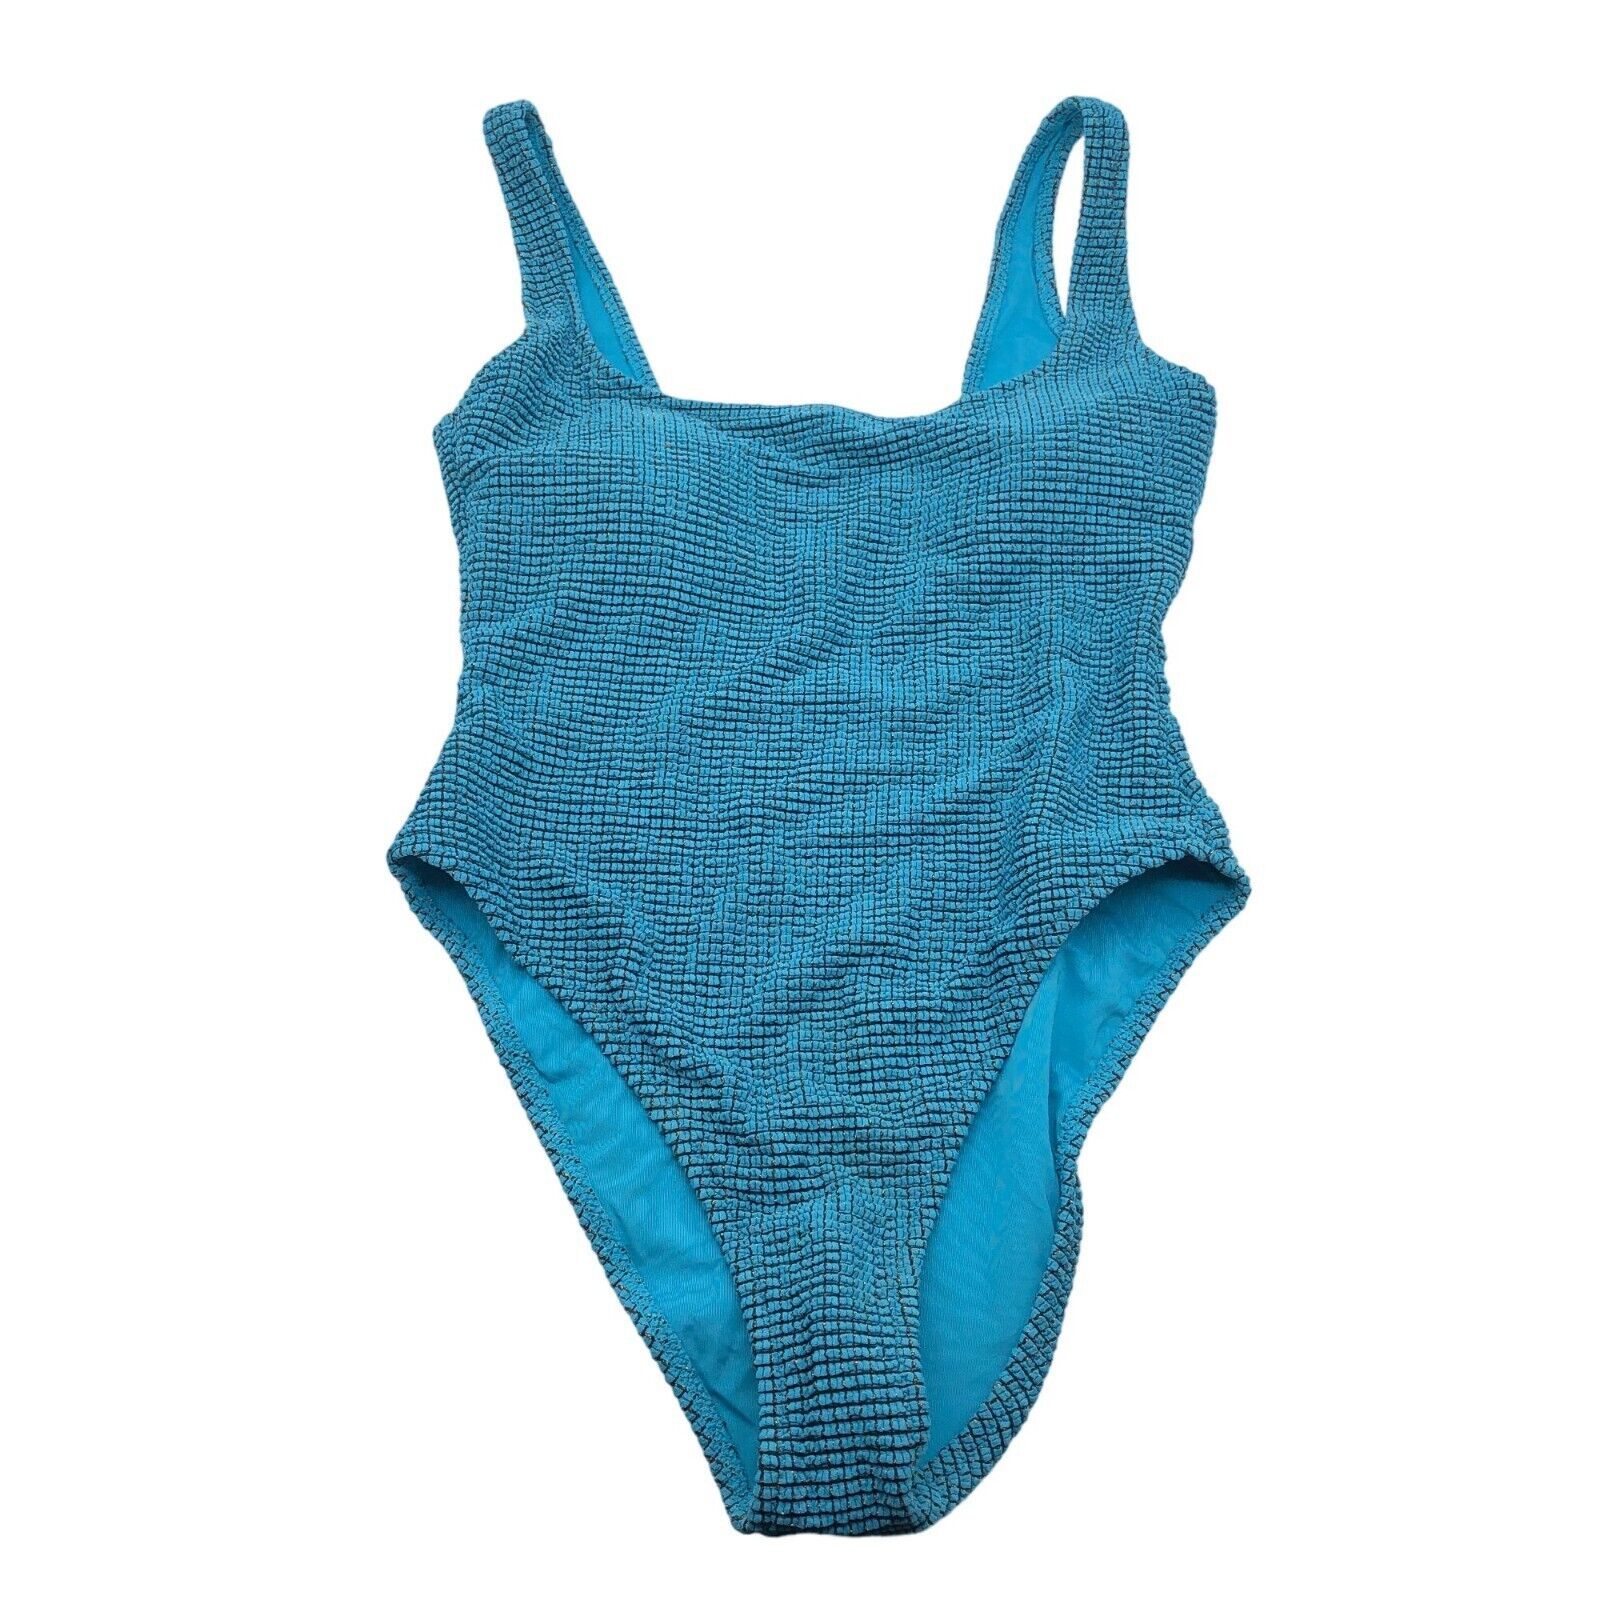 Primary image for Aerie Lurex Crinkle Babewatch One Piece Cheeky Swimsuit Casablanca Blue M